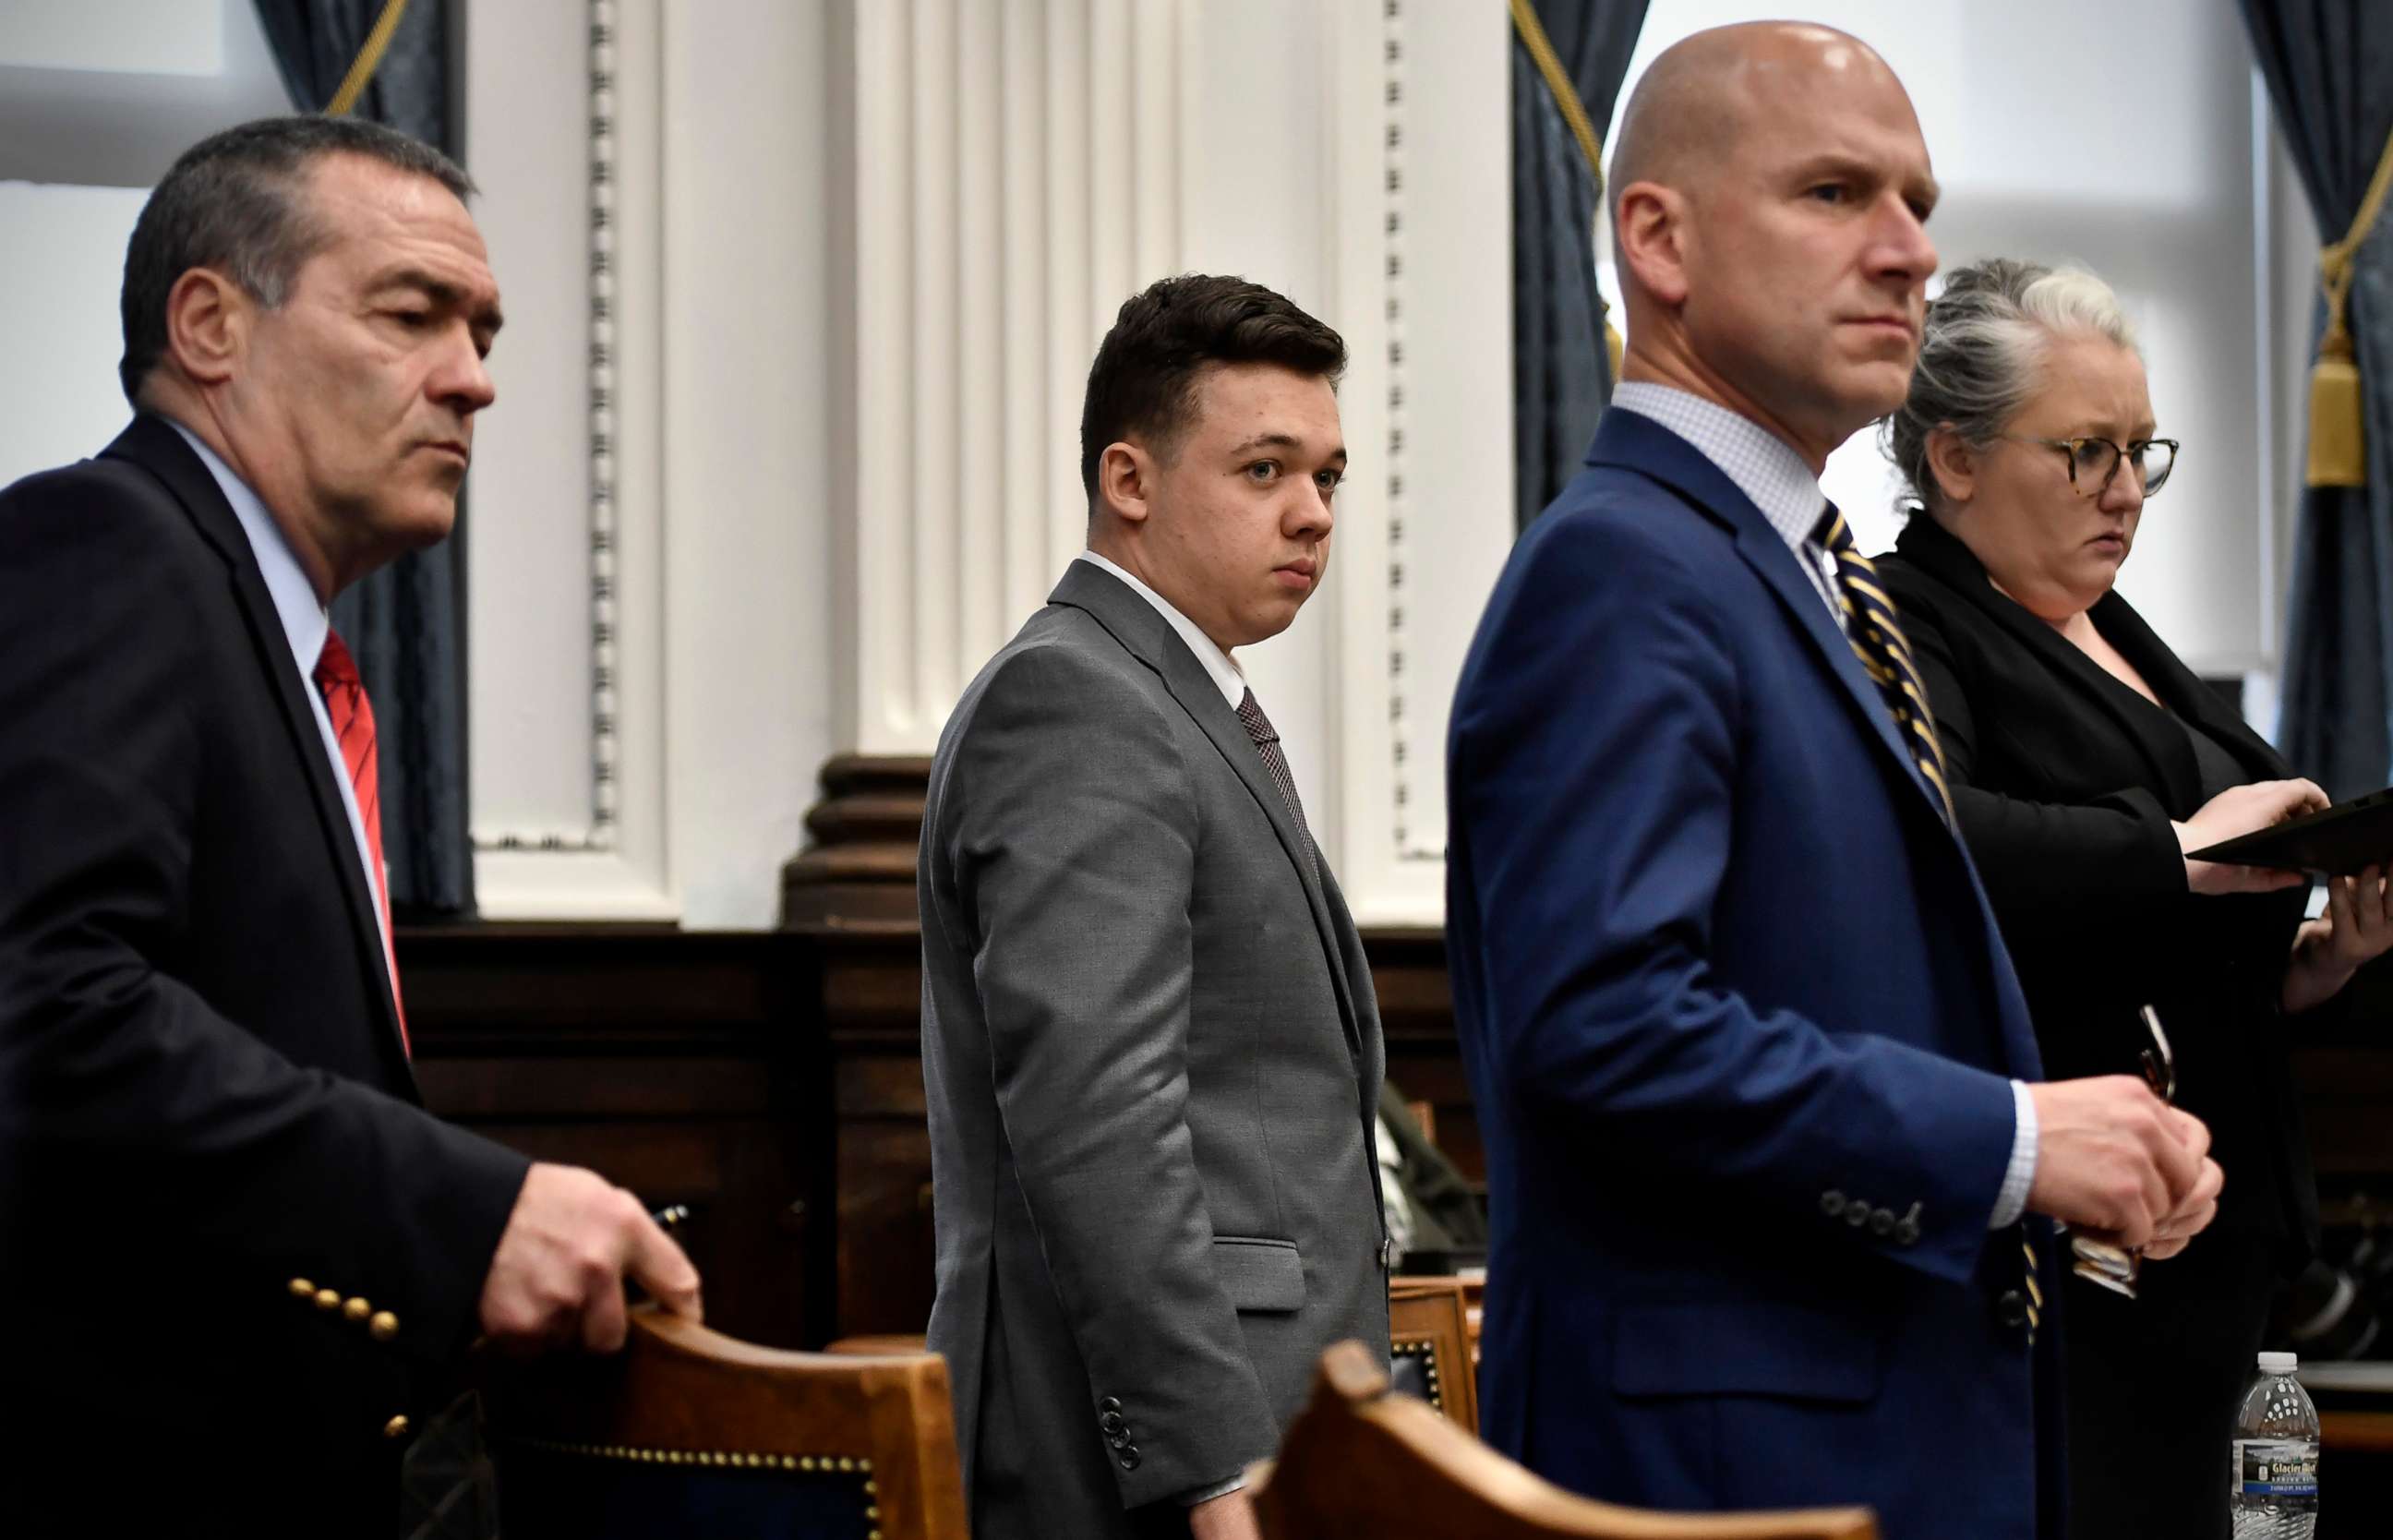 PHOTO: Kyle Rittenhouse, center, stands with his attorneys, from left, Mark Richards, Corey Chirafisi and Natalie Wisco before viewing video during proceedings at the Kenosha County Courthouse in Kenosha, Wis., Nov. 12, 2021. 